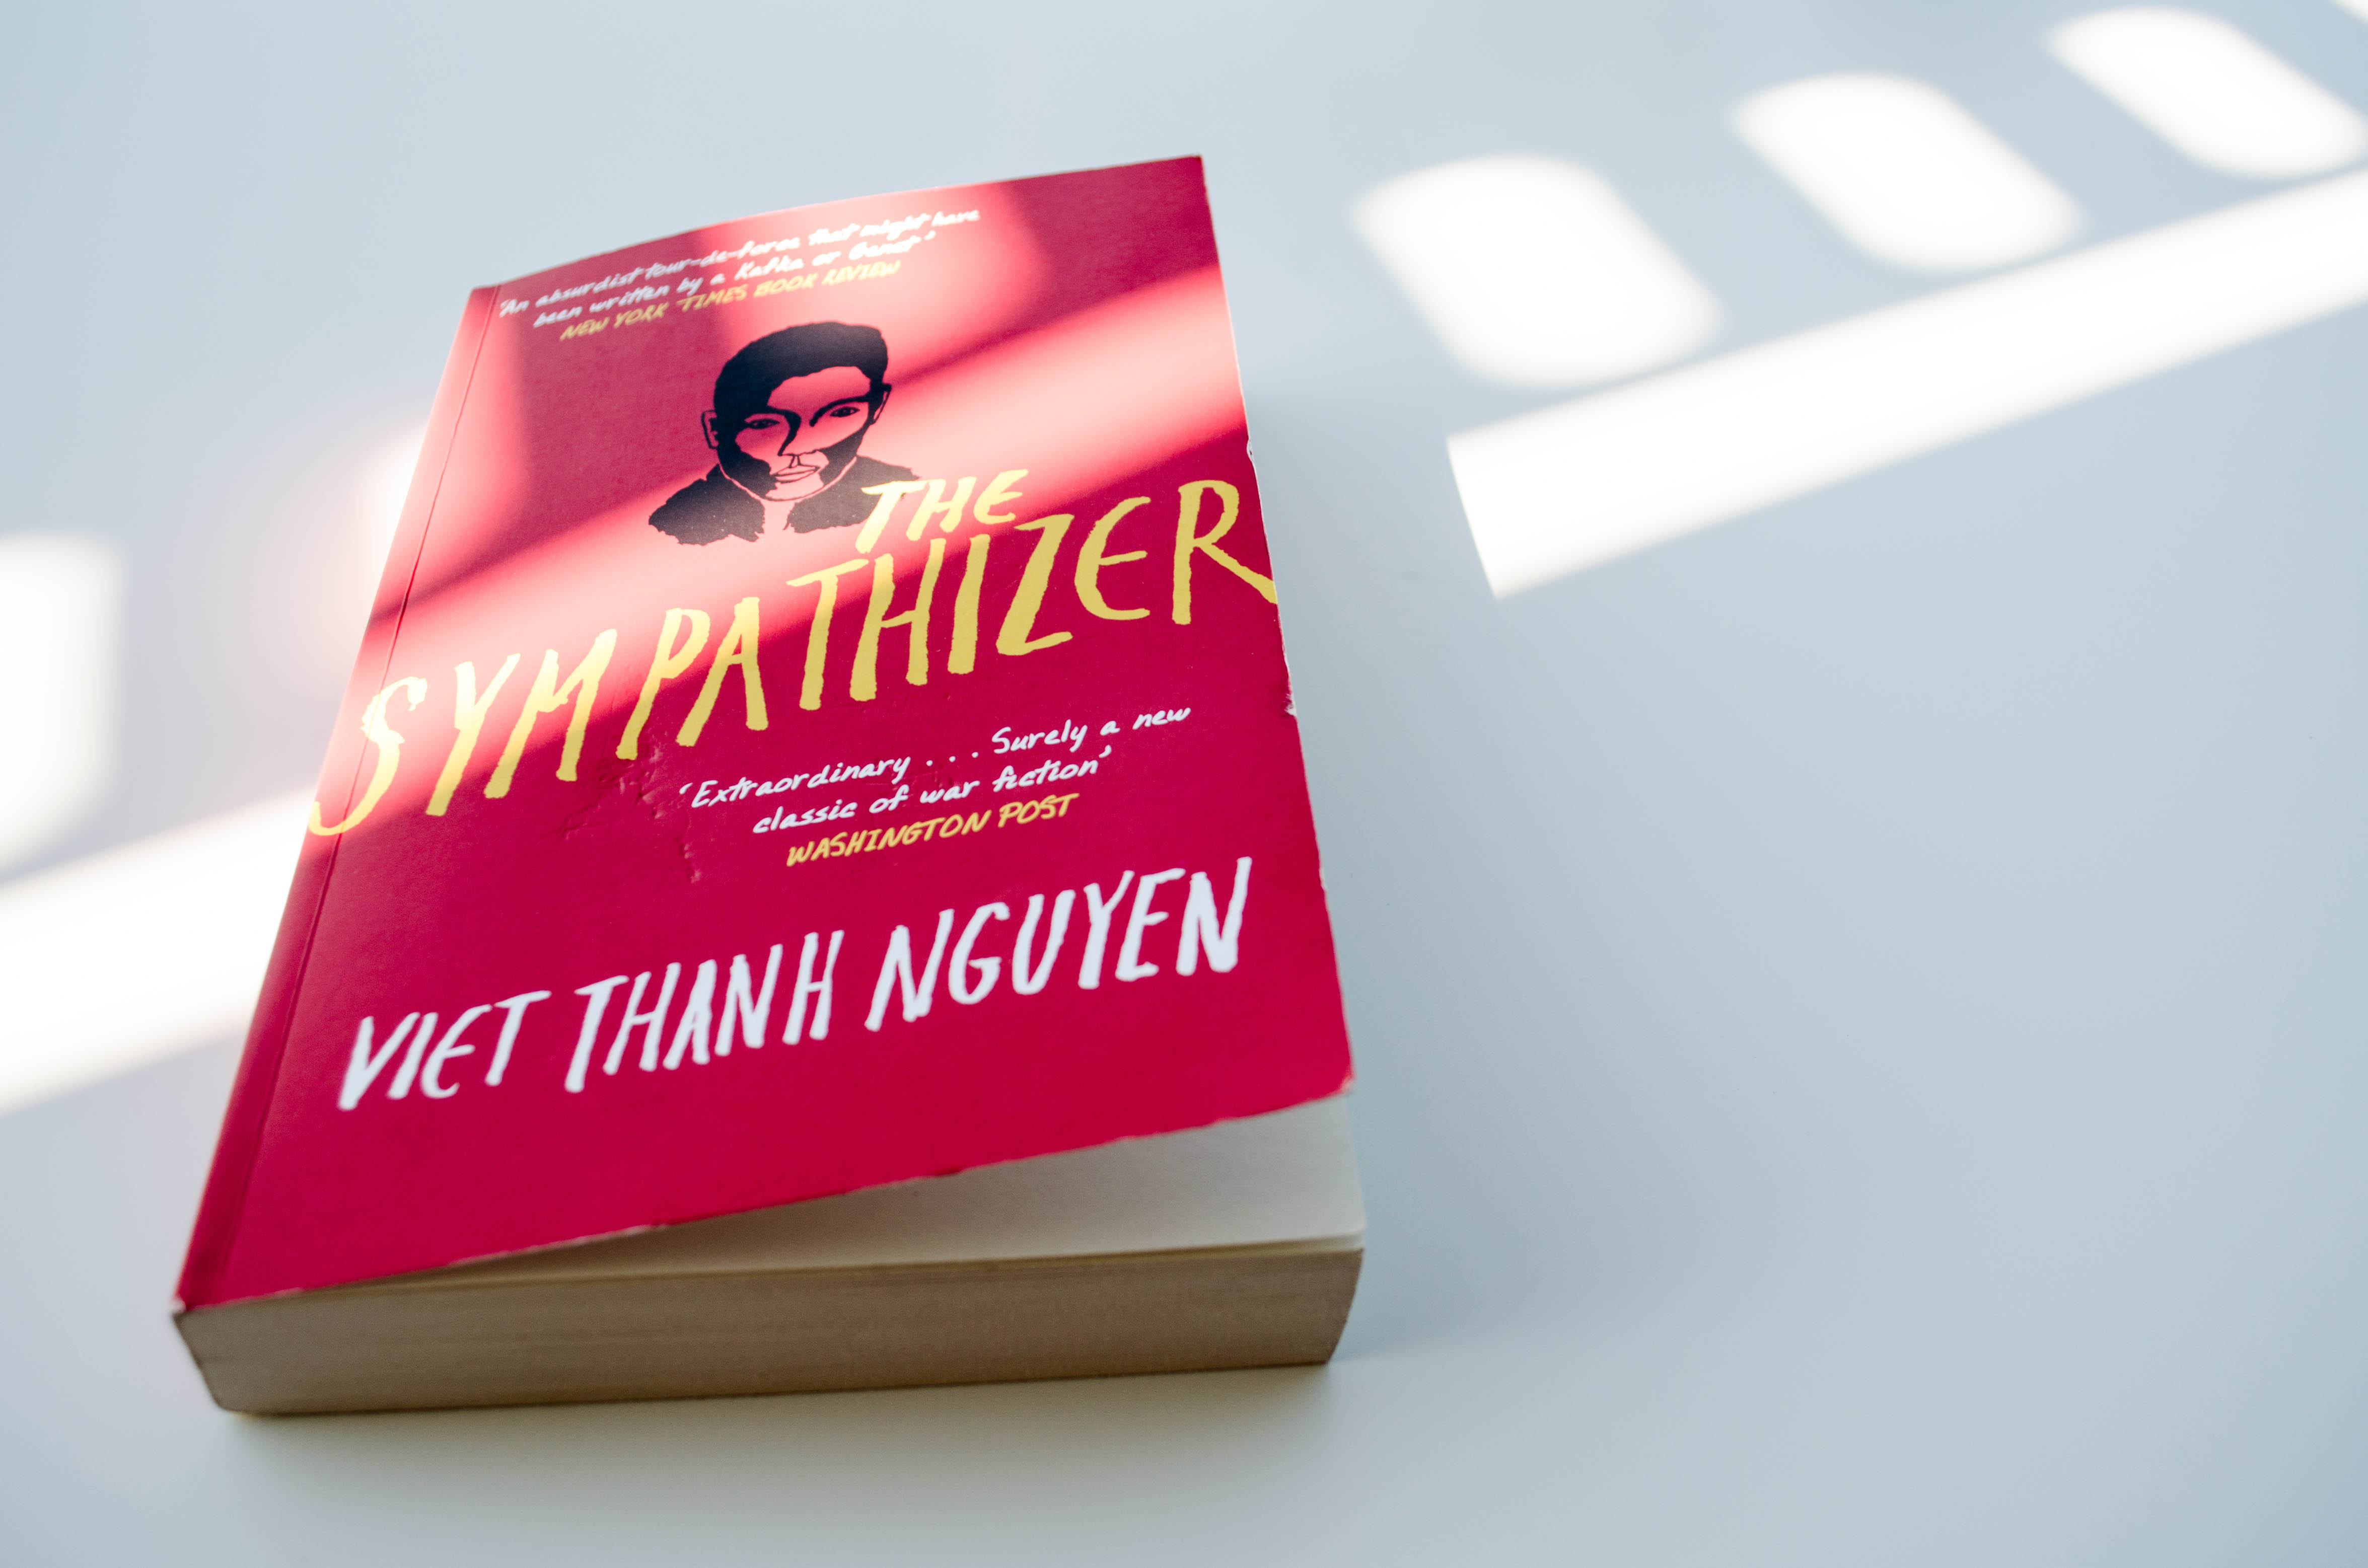 The Sympathizer by Viet Thanh Nguyen tells the story of a communist sleeper agent after the Vietnam War